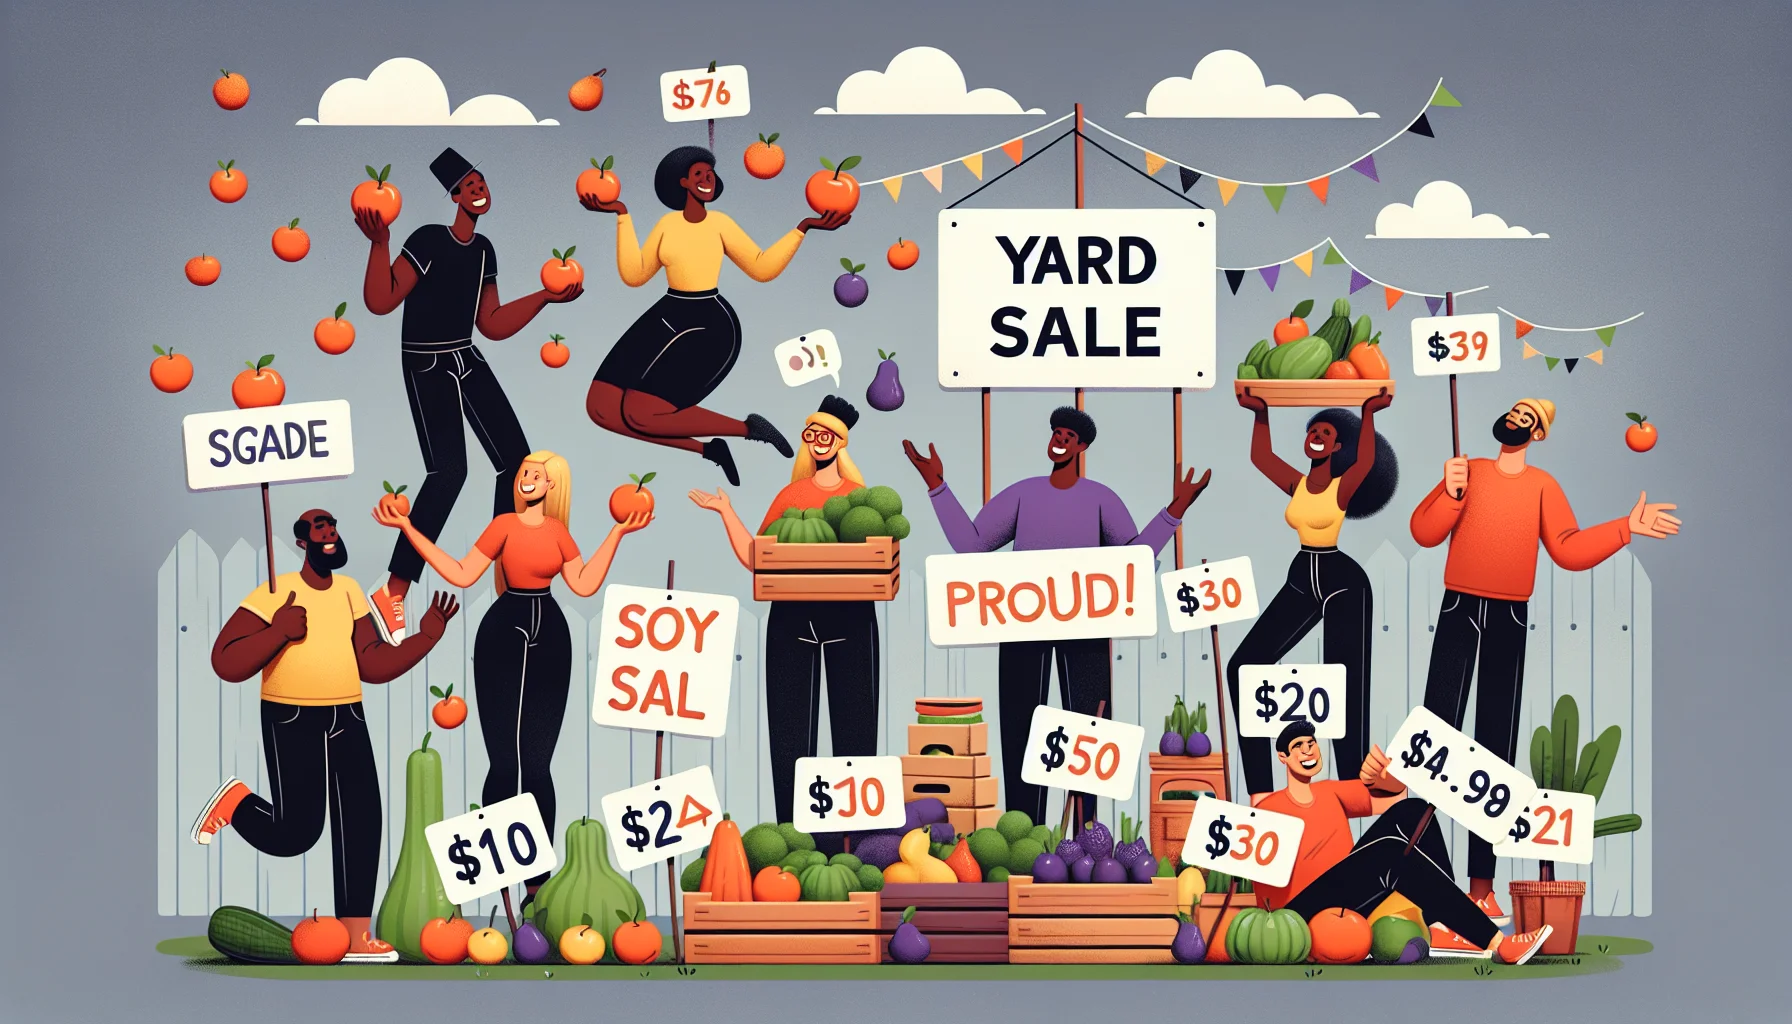 Depict a unique and humorous yard sale scene involving the sale of fresh, healthy produce. A variety of people from different descents, Black, Caucasian, Hispanic, and Middle-Eastern, get excited by the low prices on fruits and vegetables. There are brightly colored signs with organizing tips for yard sales, including correct pricing, attractive display of items, and clever marketing strategies. Additionally, comedic elements such as a person trying to juggle apples, another balancing a pile of oranges in their arms, reflecting the fun side of eating healthy on a budget.